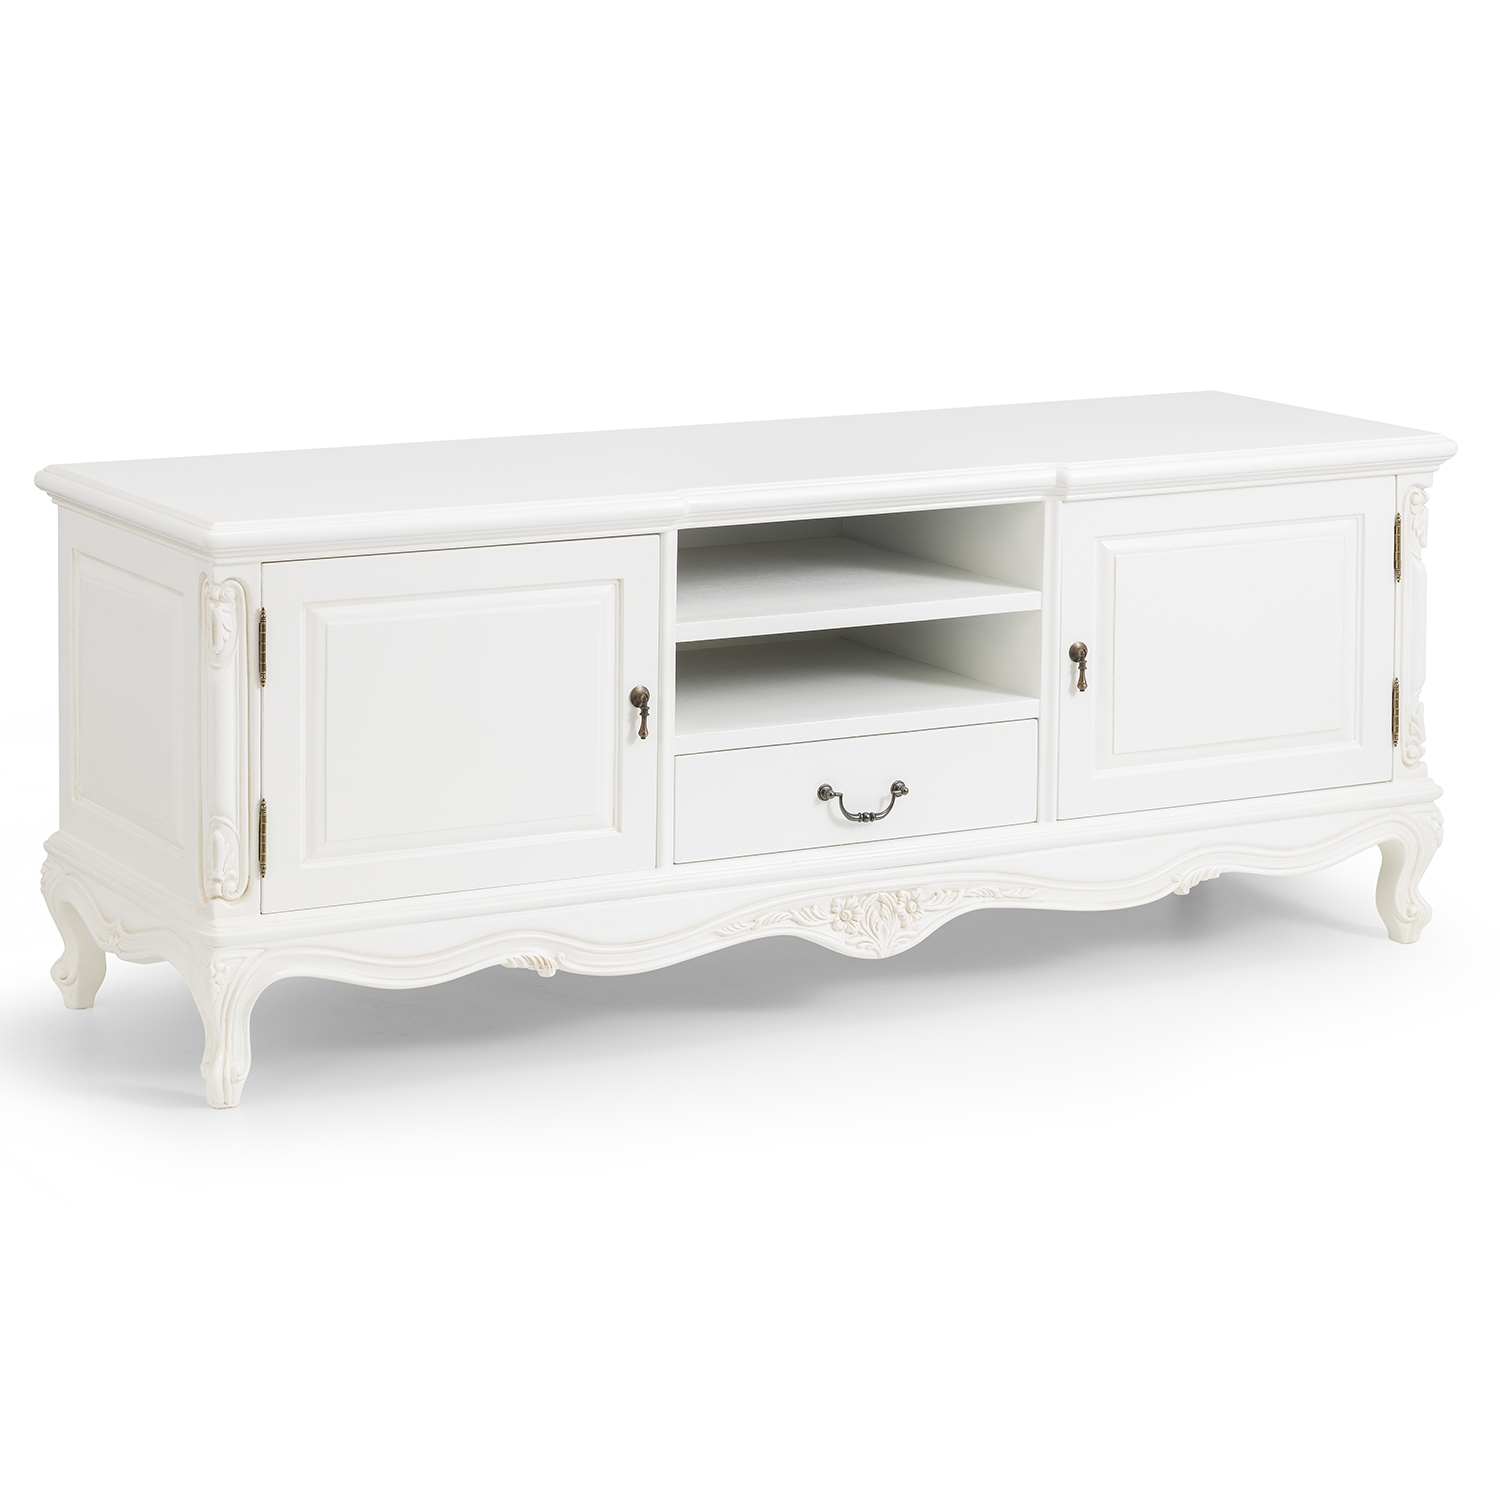 Beaulieu Antique White French Style Low TV Cabinet | French TV Cabinets |  Shabby Chic Furniture | French Furniture